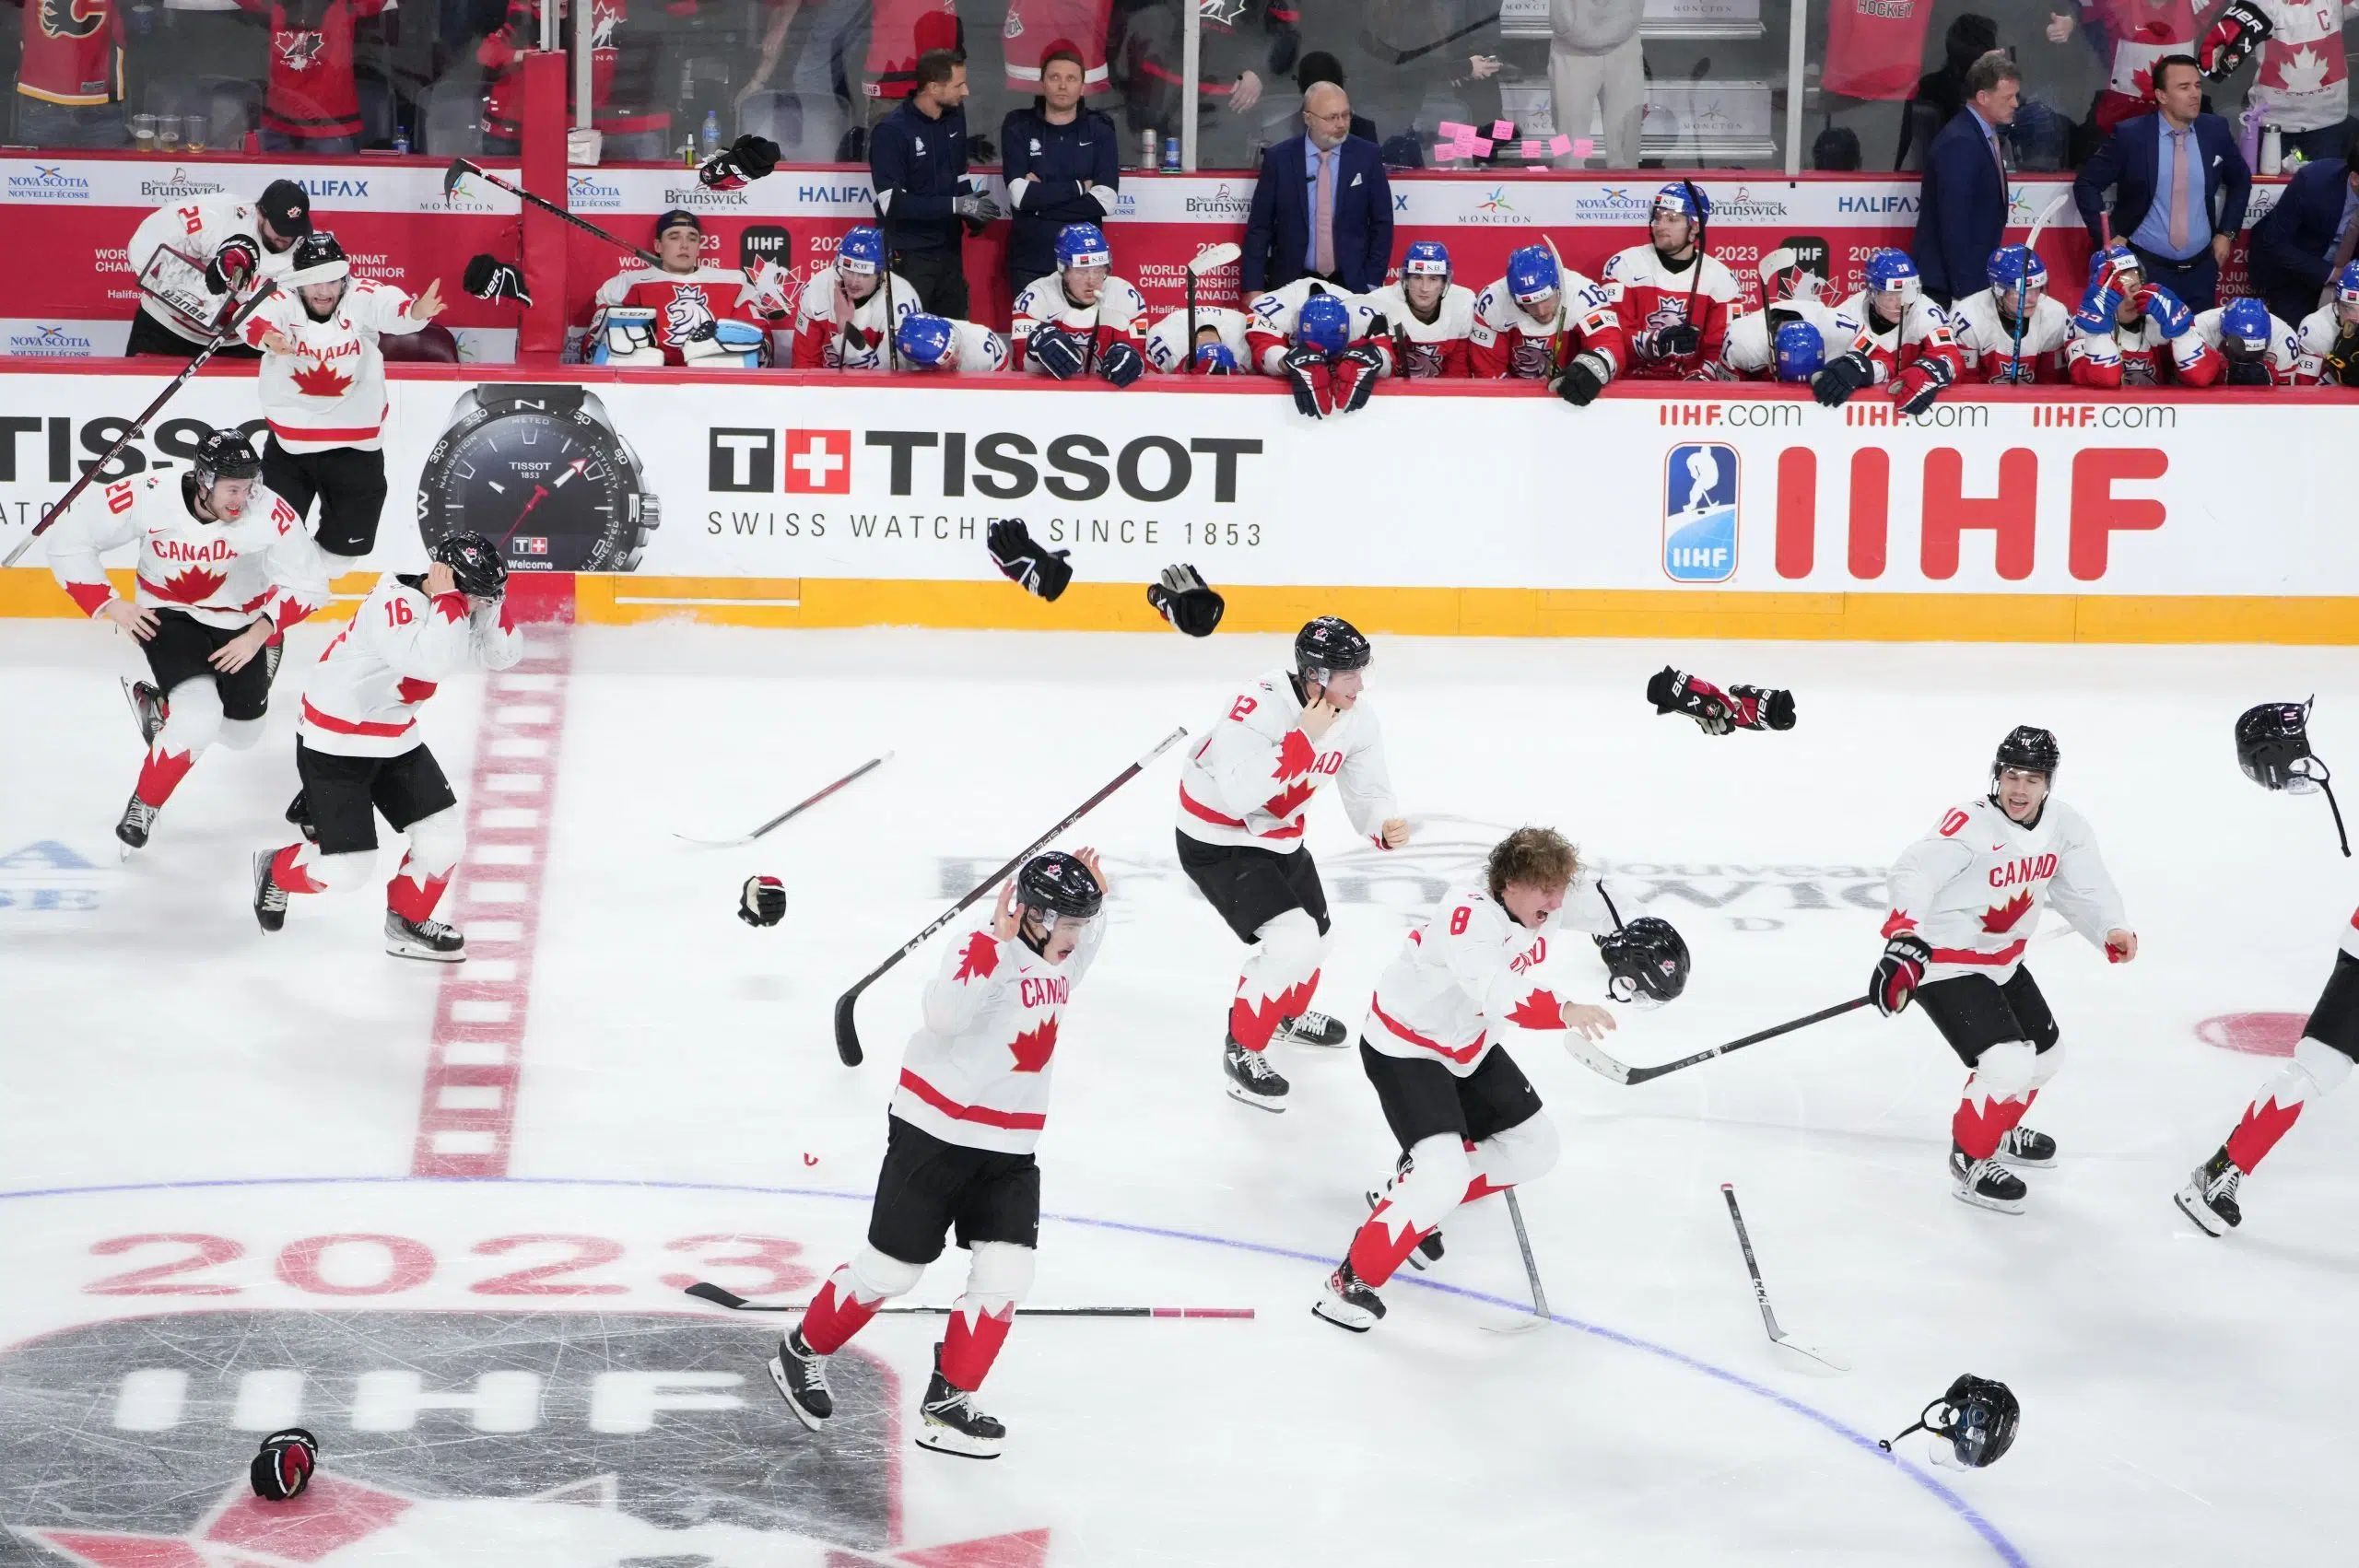 Guenther's golden goal: Canada wins world junior title with OT victory over Czechia